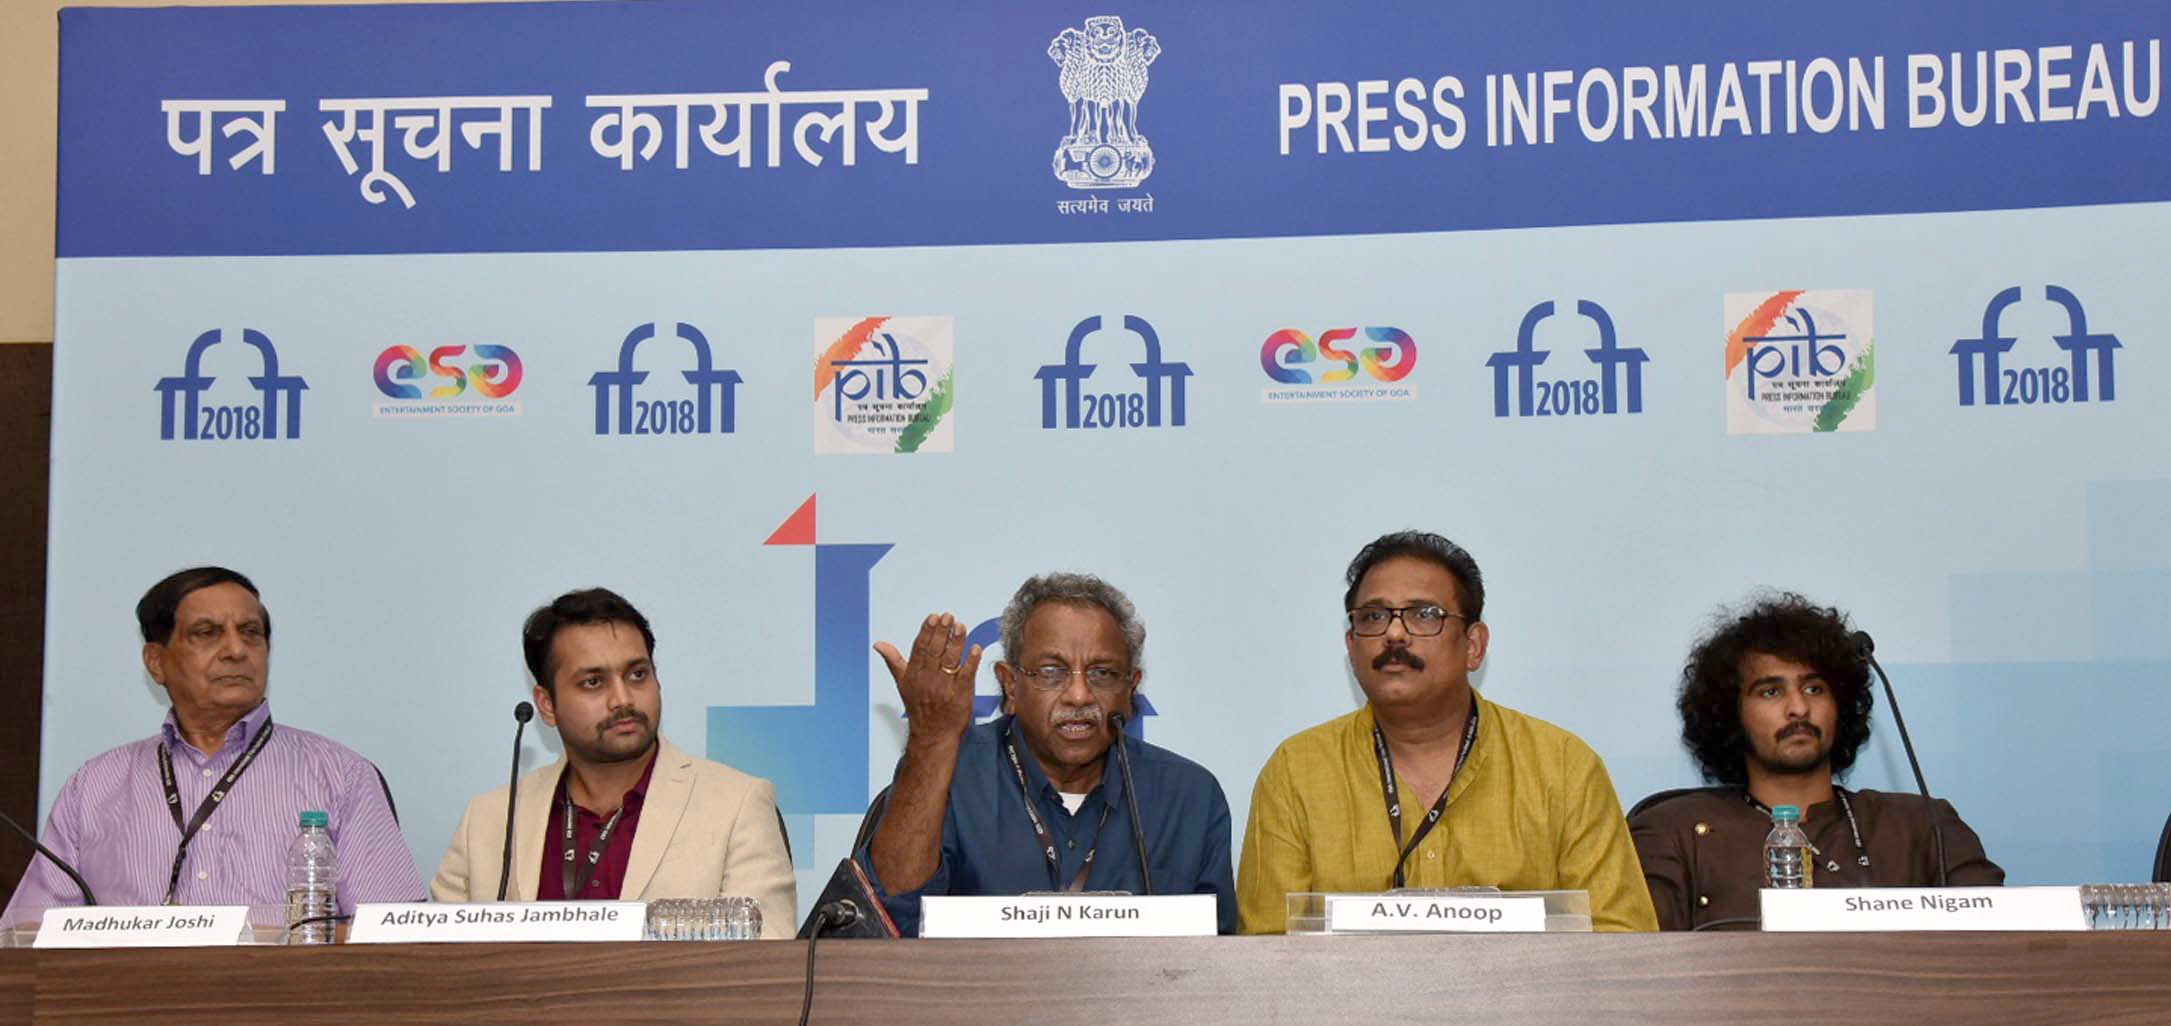 Director of Olu ’Sh. Shaji karun during the press conference on opening movie of Indian Panorama.